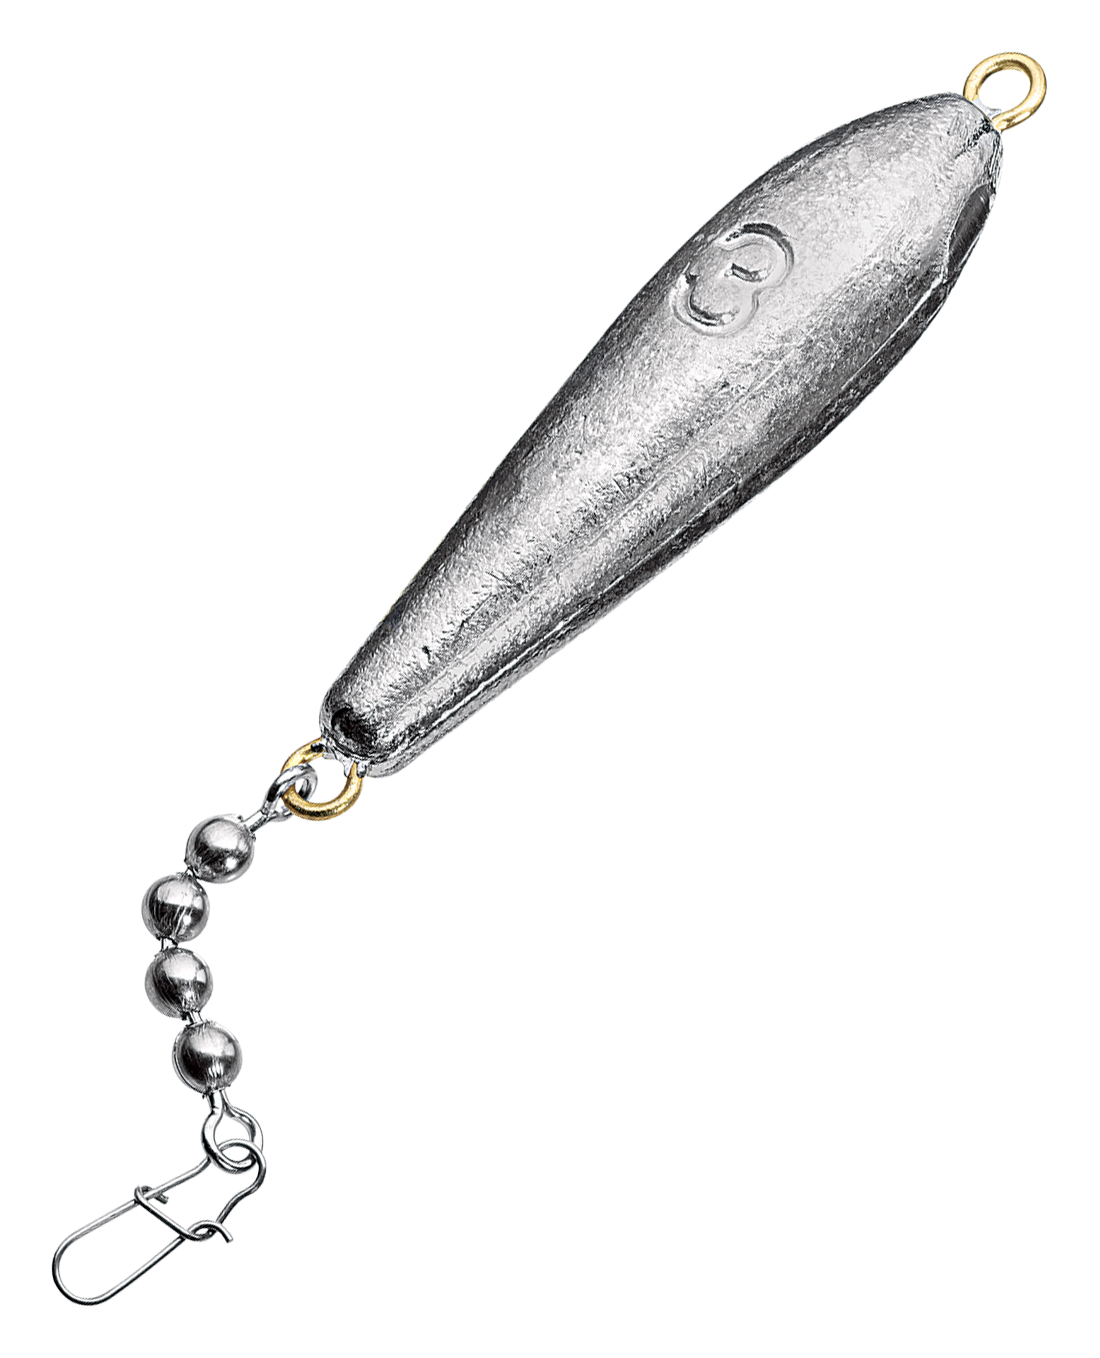 Trolling Sinkers with Stainless Steel Bead Chain 3/4oz